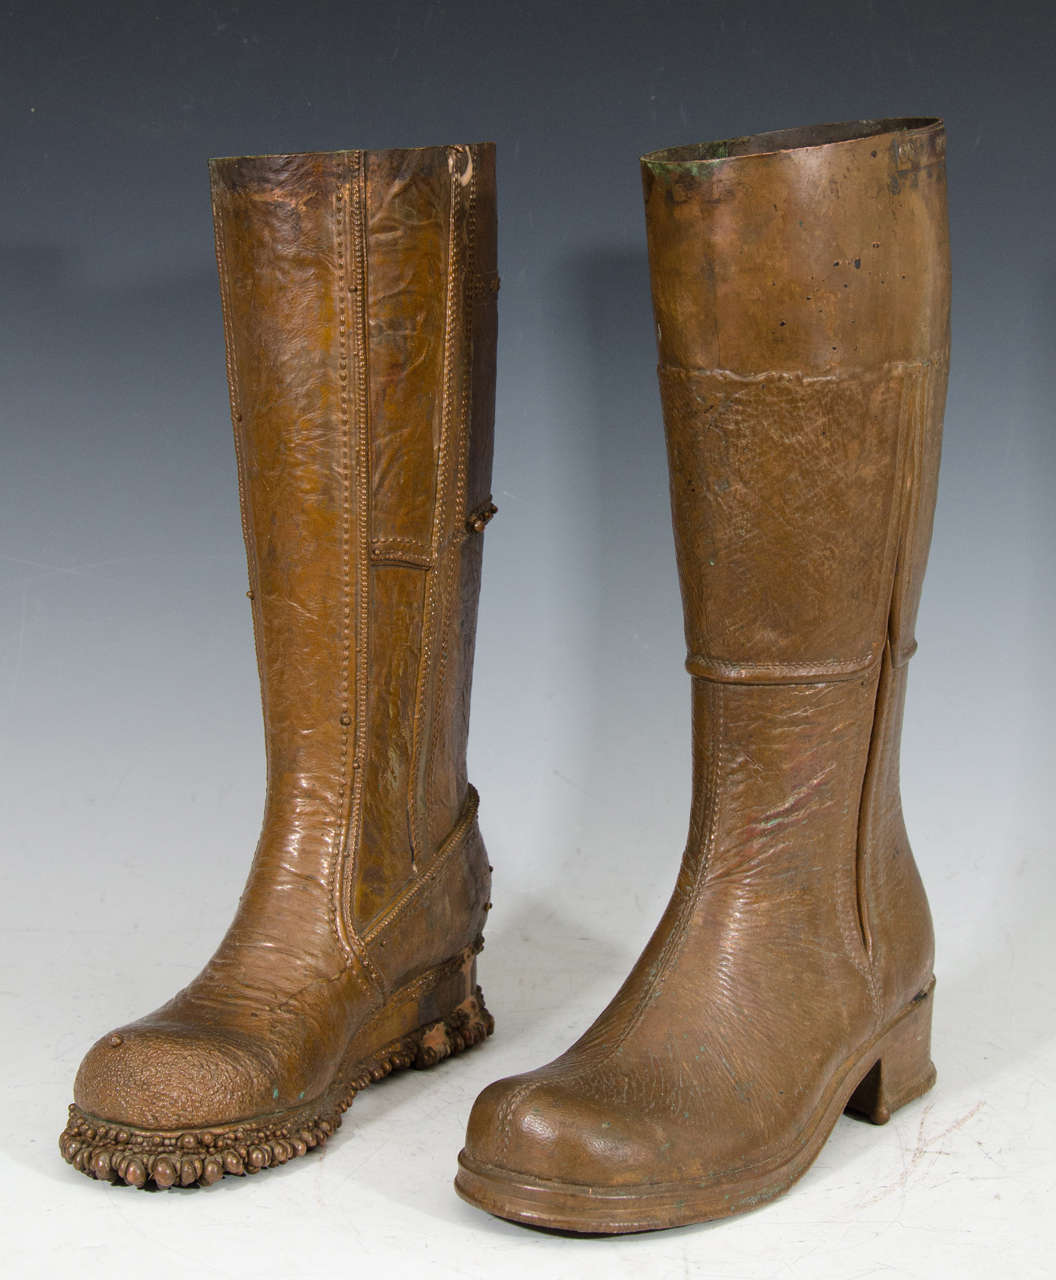 A vintage set of two Mid Century, unmatched, life-size bronze boot sculptures by Silas Seandel.  Good vintage condition with age appropriate wear.

Dimensions for boot dated 4/14/76: 16.5